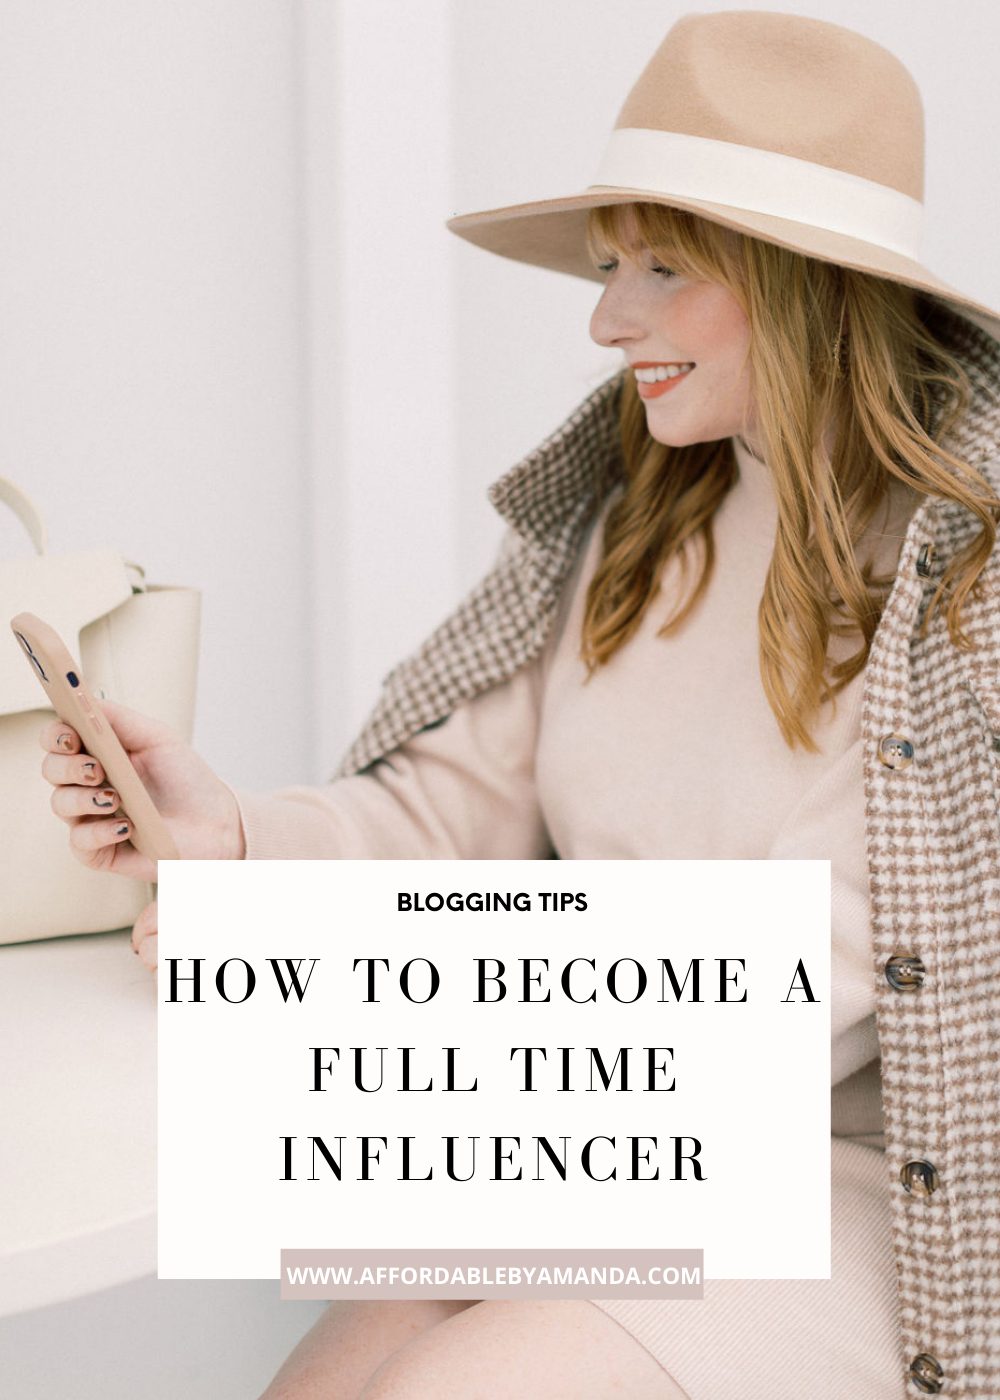 How to Become a Full Time Influencer - Affordable by Amanda